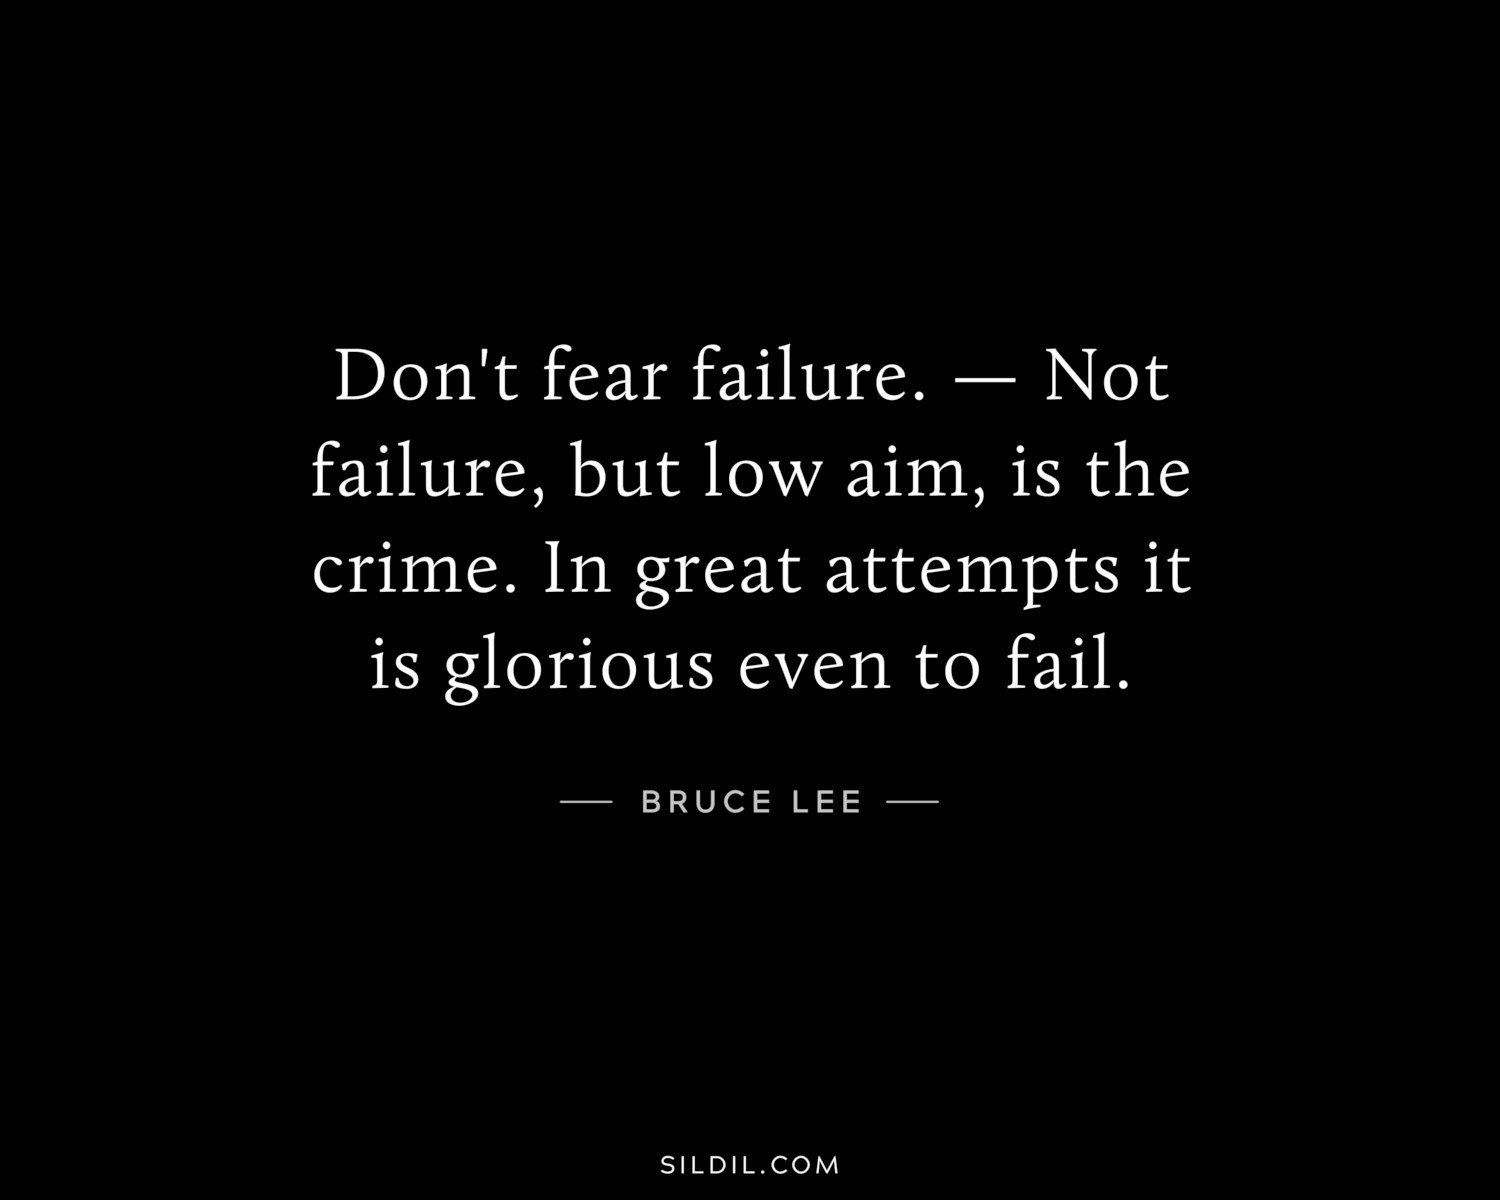 Don't fear failure. — Not failure, but low aim, is the crime. In great attempts it is glorious even to fail.